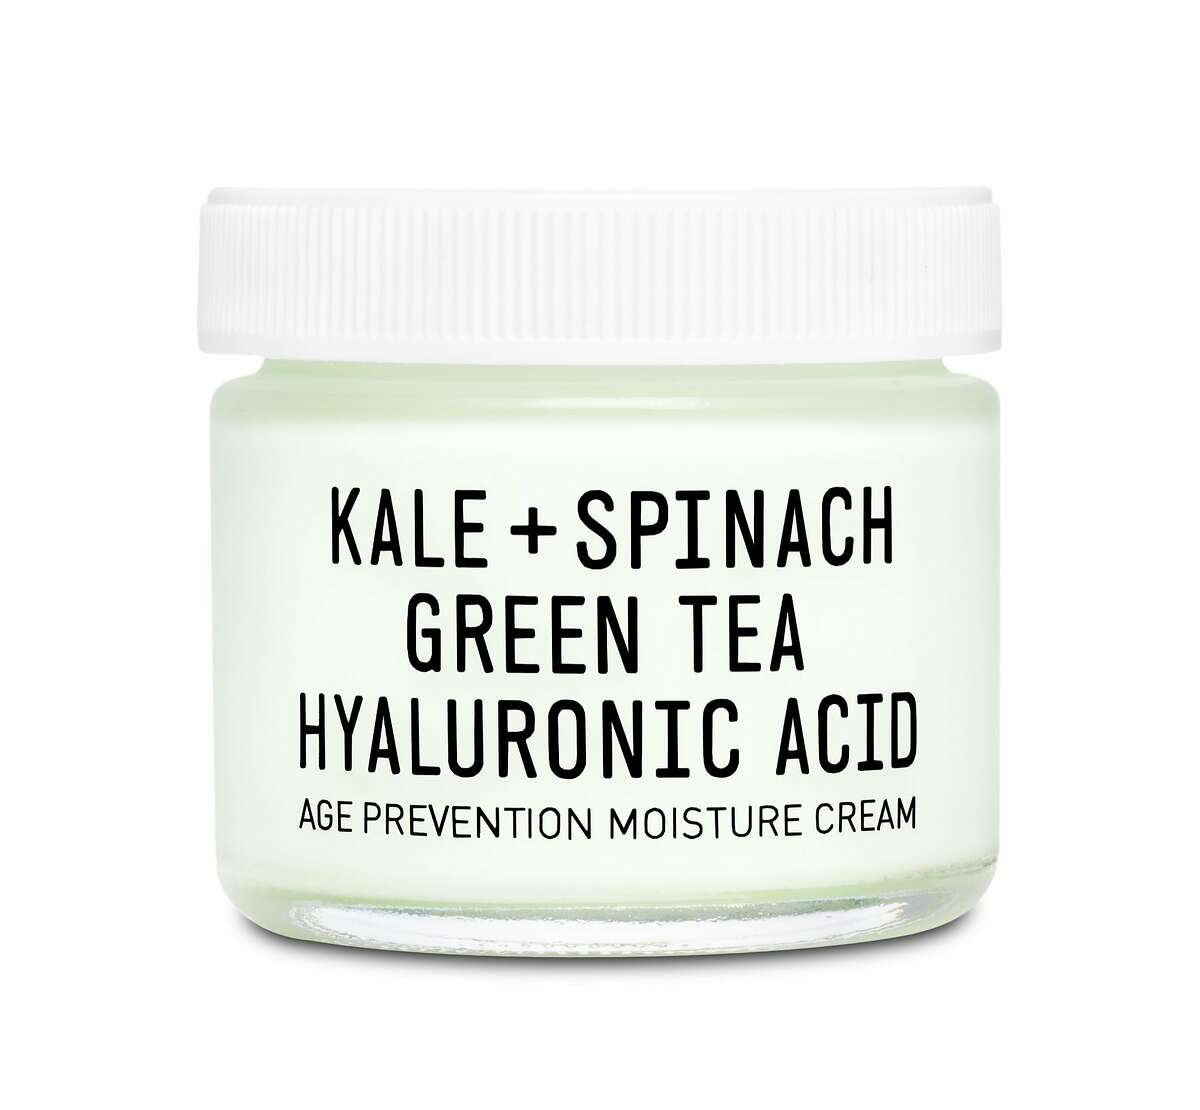 Replace your heavy winter face cream with a quick-absorbing gel-like cream like Youth to the People Age Prevention Cream. This fluffy moisturizer, packed with free radical-fighting antioxidants like kale, spinach, and green tea, also hydrates with hyaluronic acid and sunflower seed oil. $48. www.sephora.com. S,A,B,C,OC,D,M